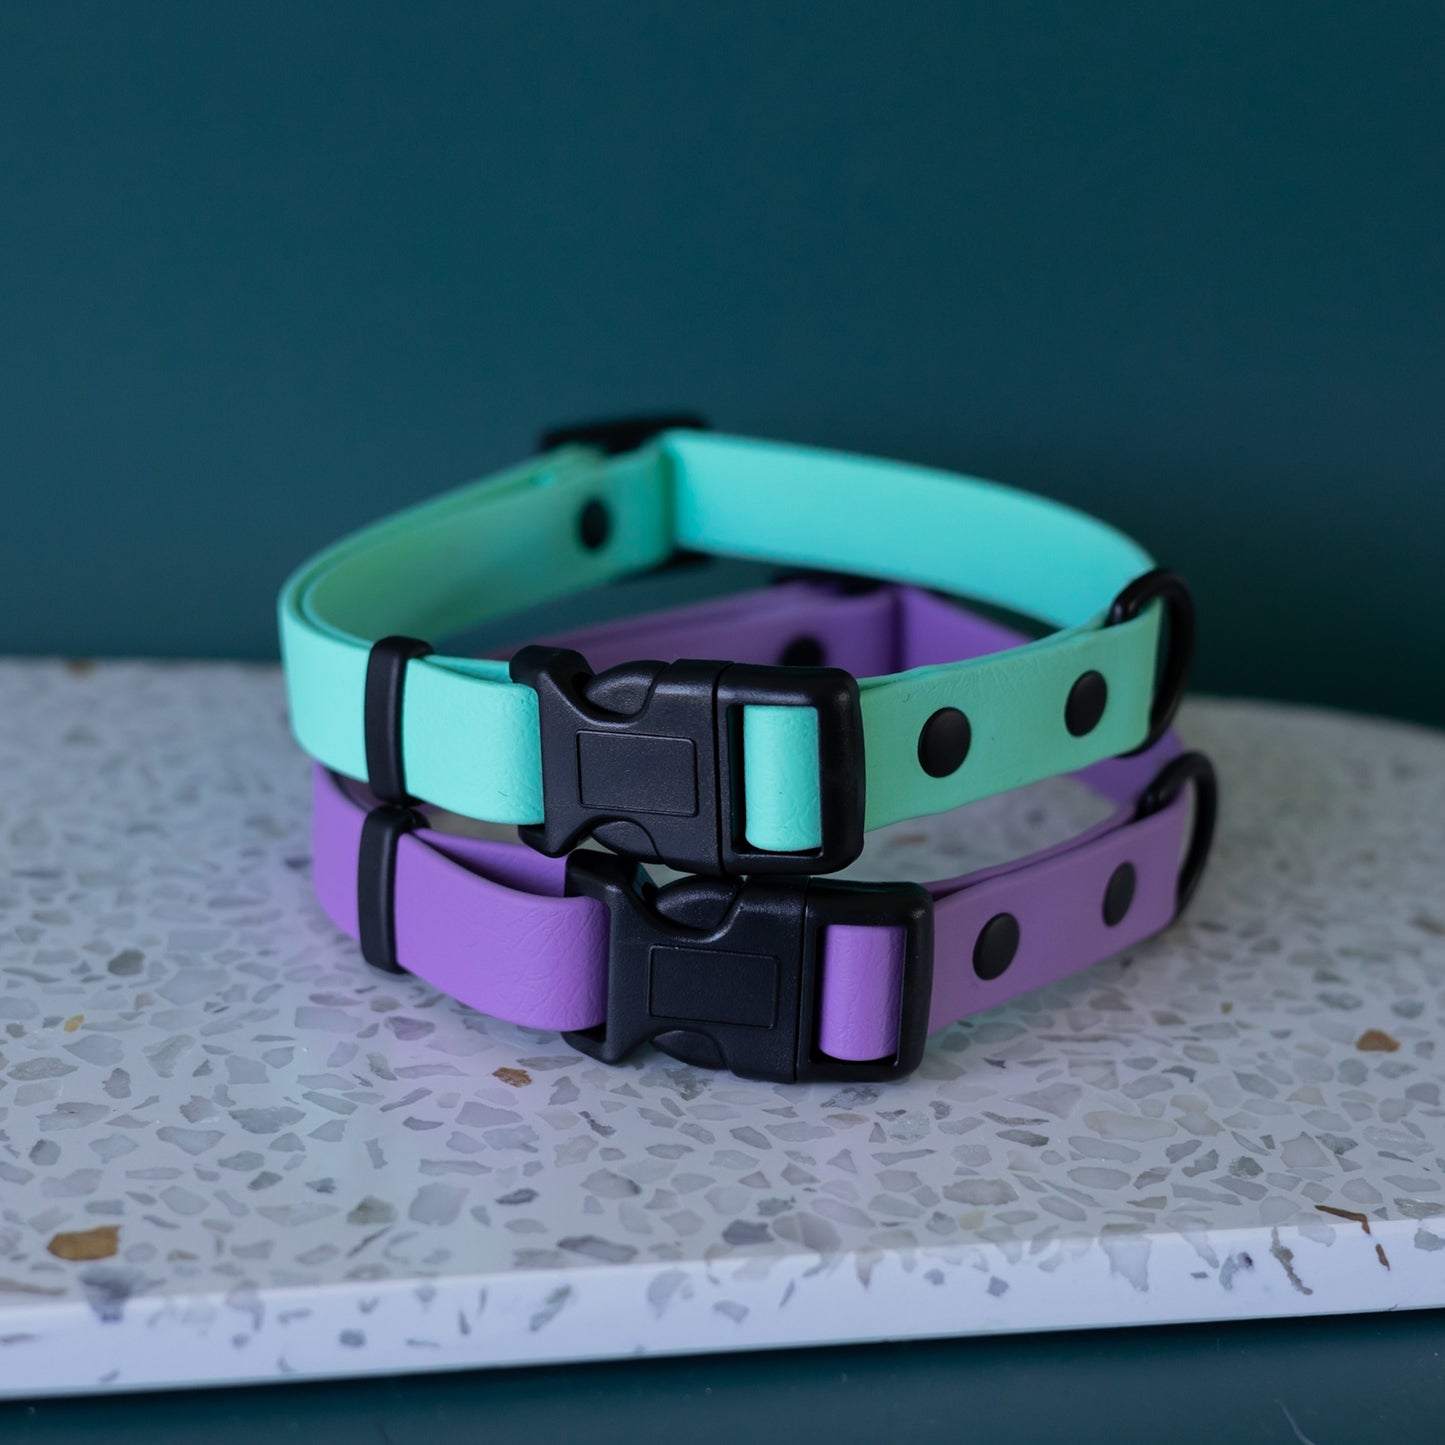 Adjustable collar with quick release buckle